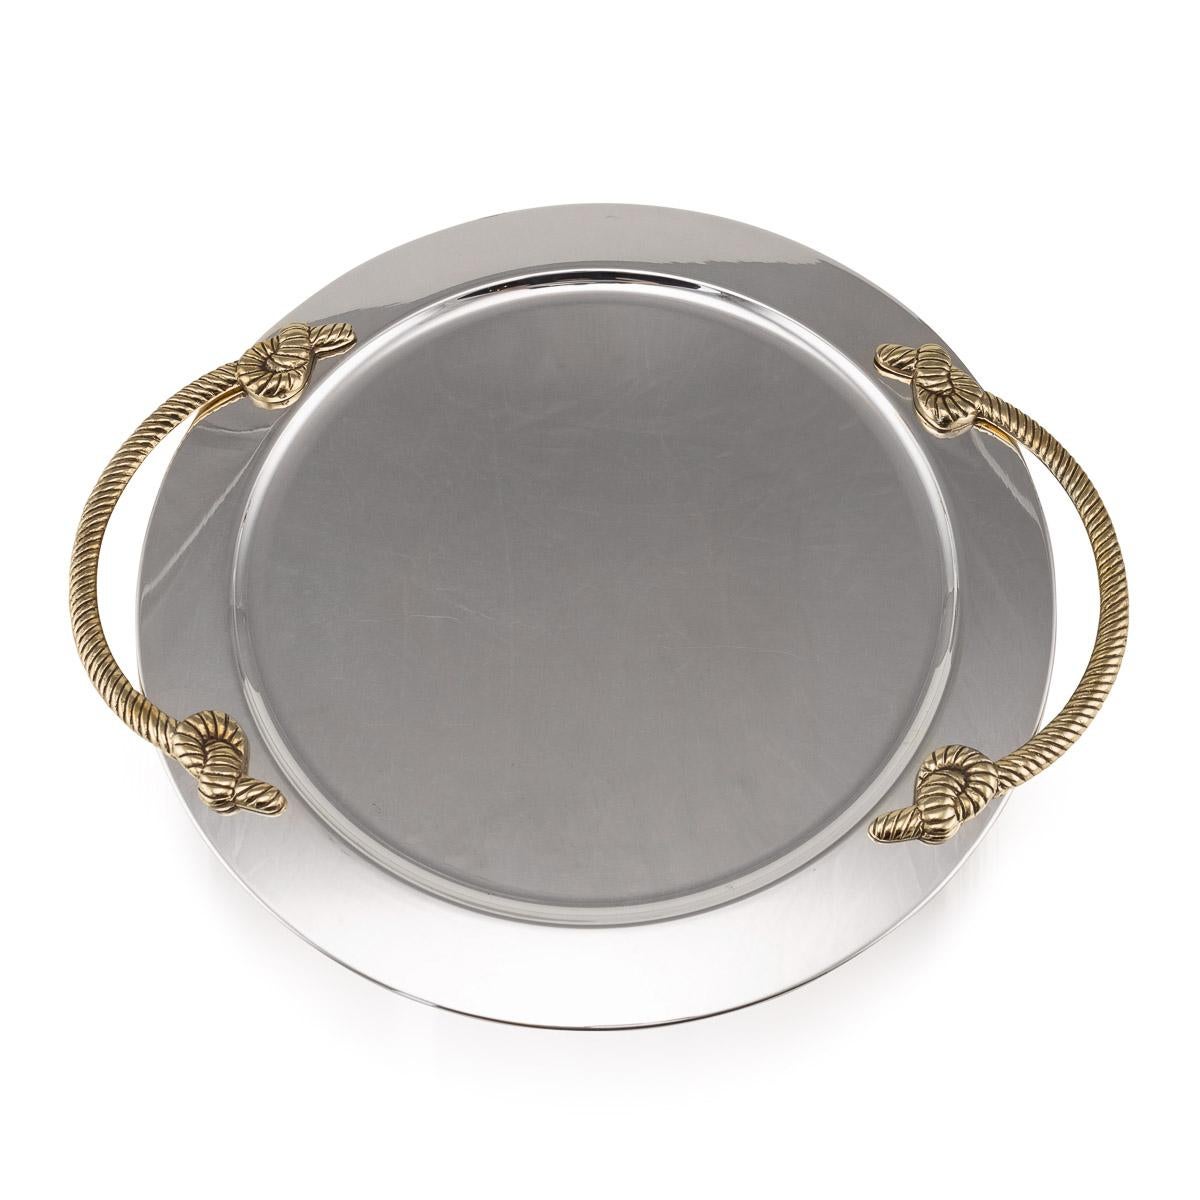 Mid 20th Century large French circular silver plated serving tray with polished brass rope handles.

Condition
In Great condition - No damage, just general wear.

Size
Diameter: 46cm
Width: 53cm handle to handle
Height: 3cm.